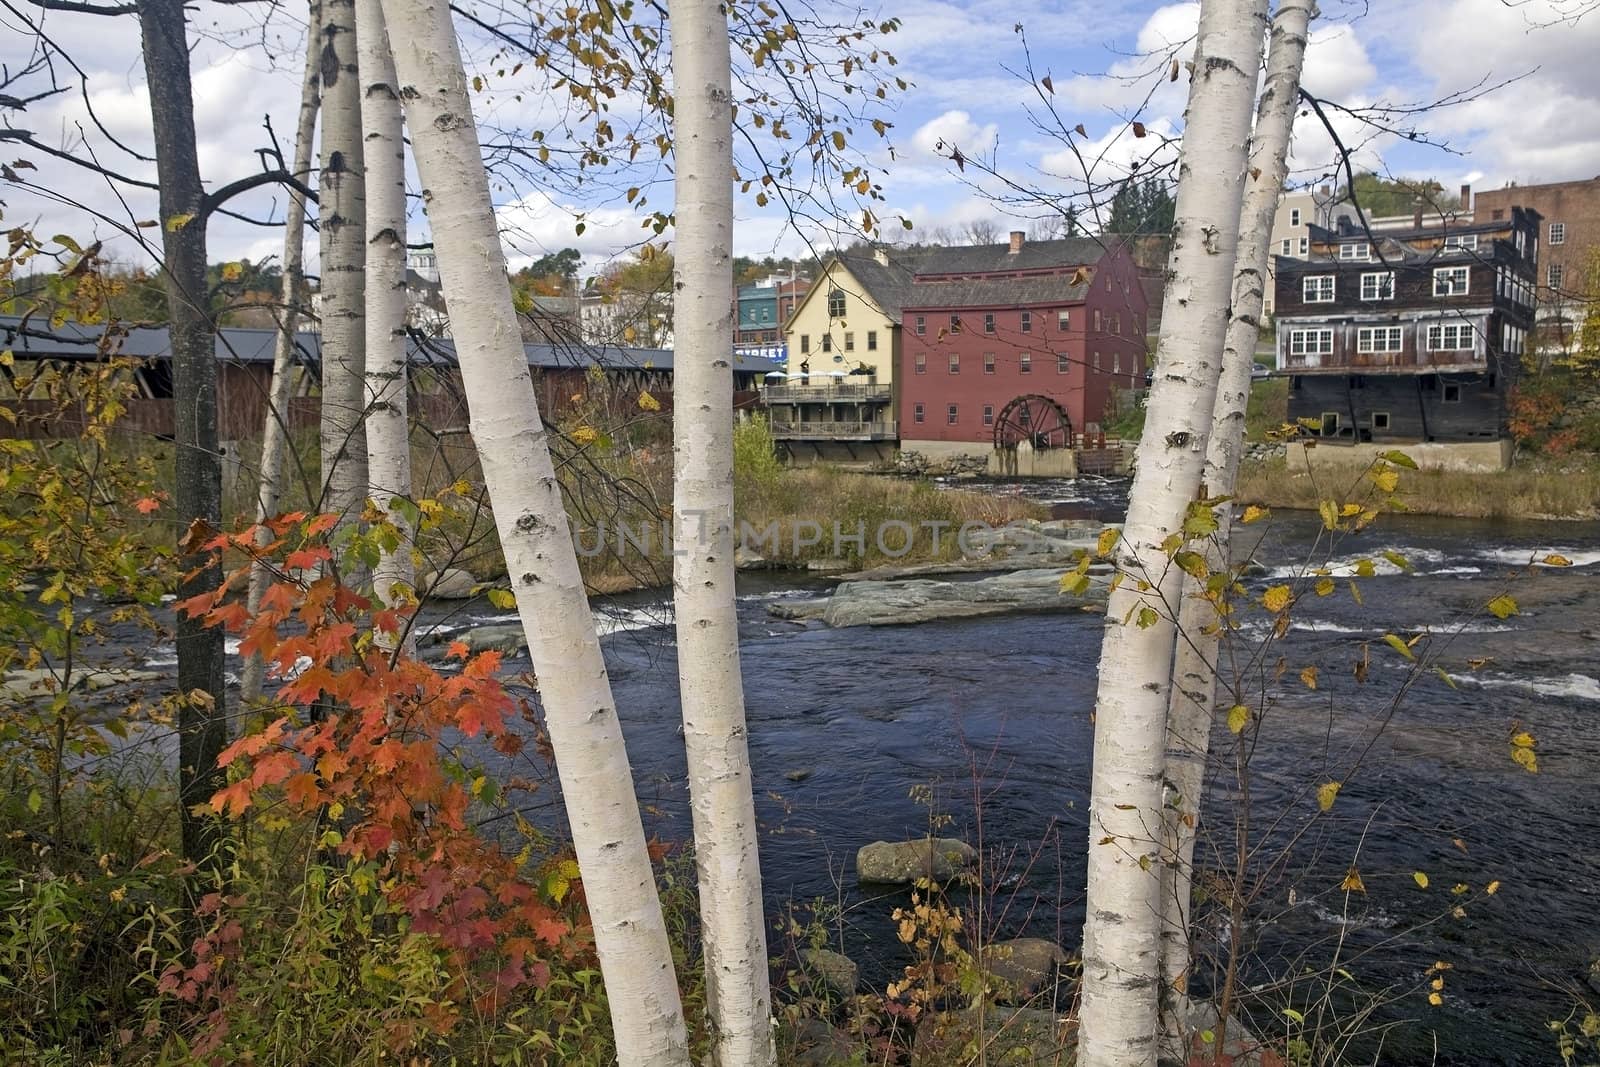 White birch trees with colorful autumn foliage growing along the Ammonoosuc River flowing through Littleton, NH. Background of blue sky, white clouds, covered bridge and old mill with water wheel.